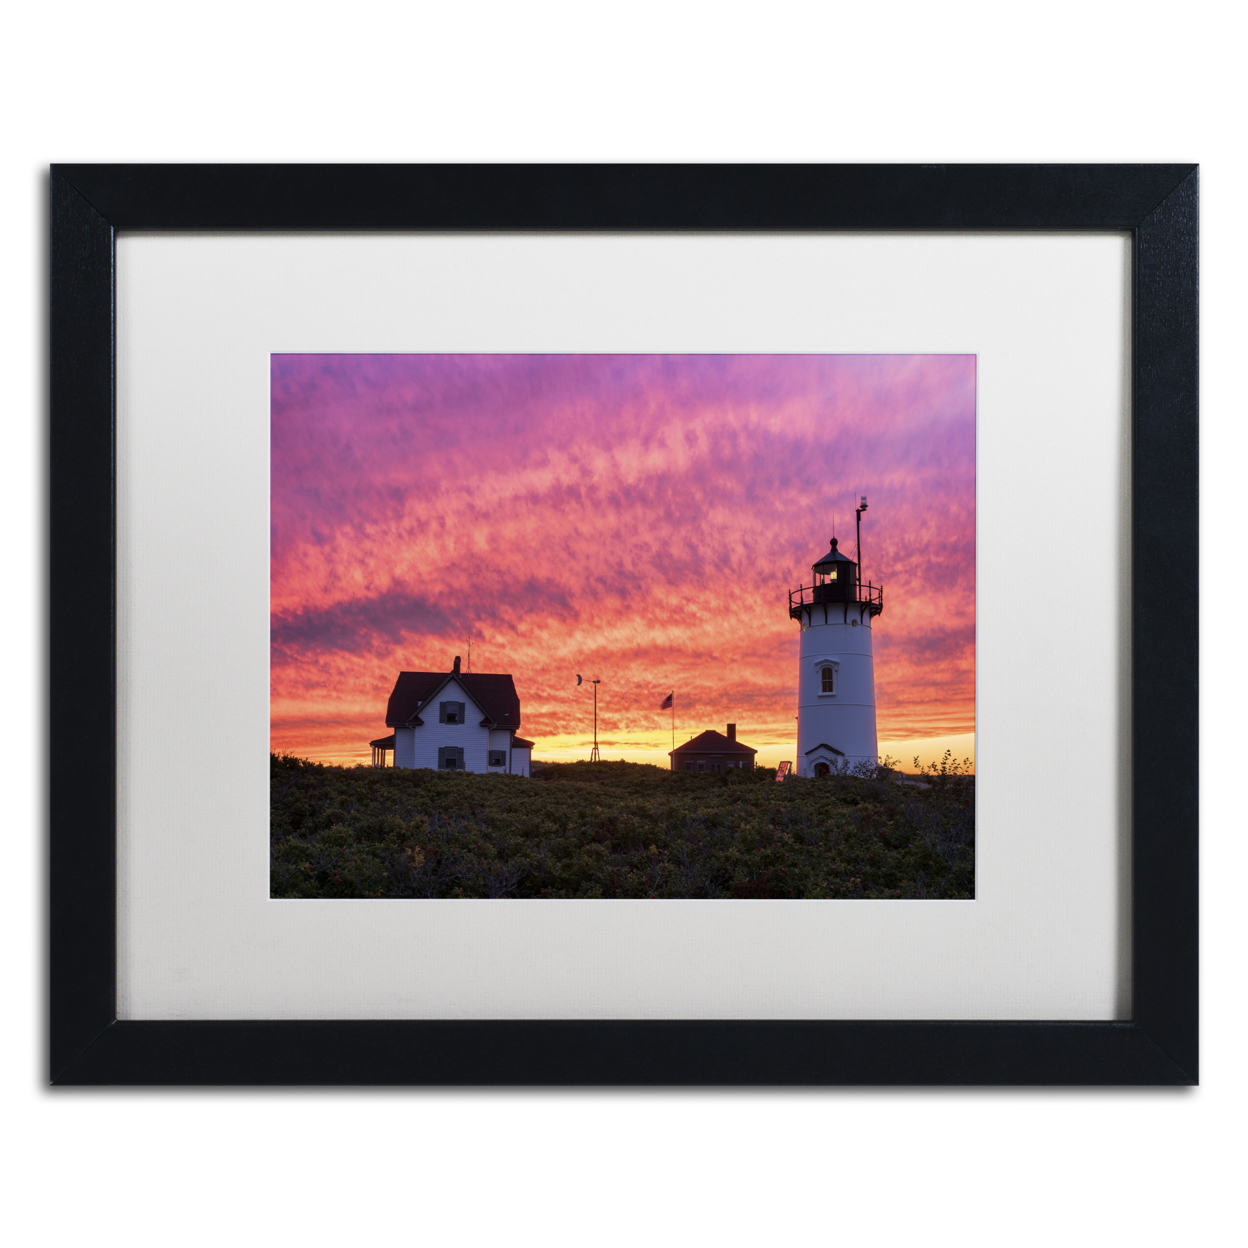 Michael Blanchette Photography 'Sky On Fire' Black Wooden Framed Art 18 X 22 Inches